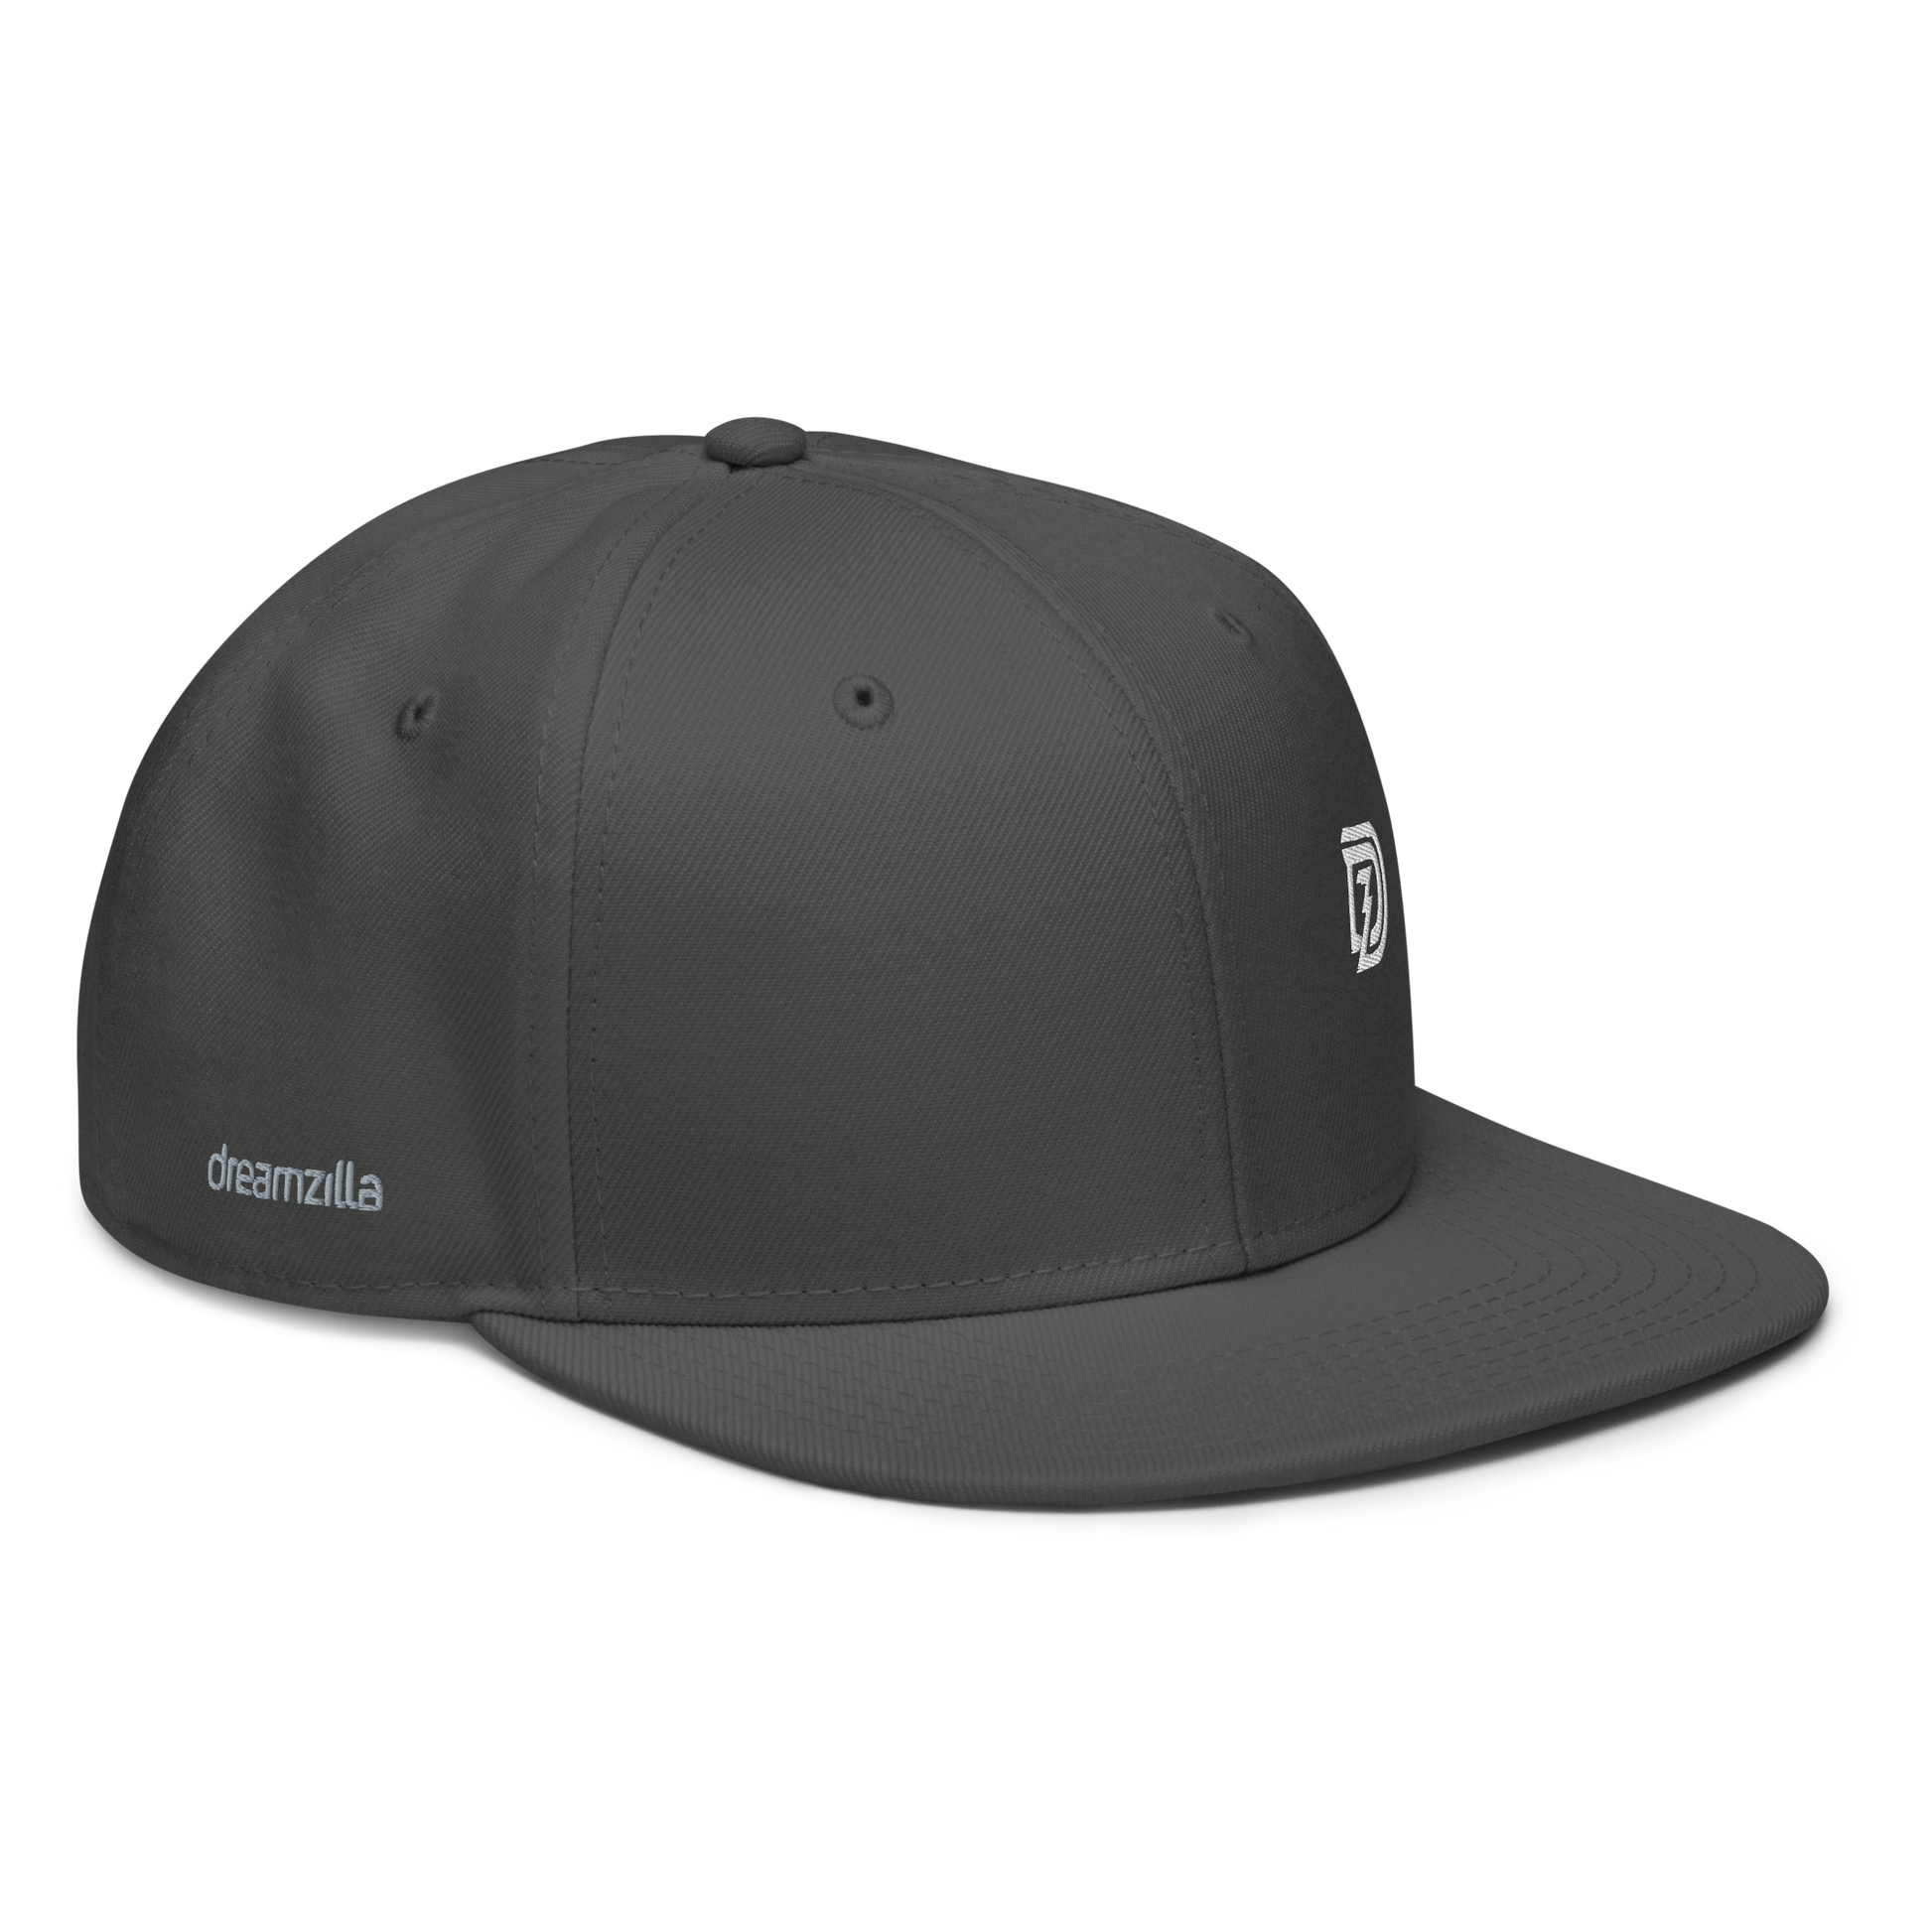 Angled View of DZ Monochrome Snapback in Charcoal Gray